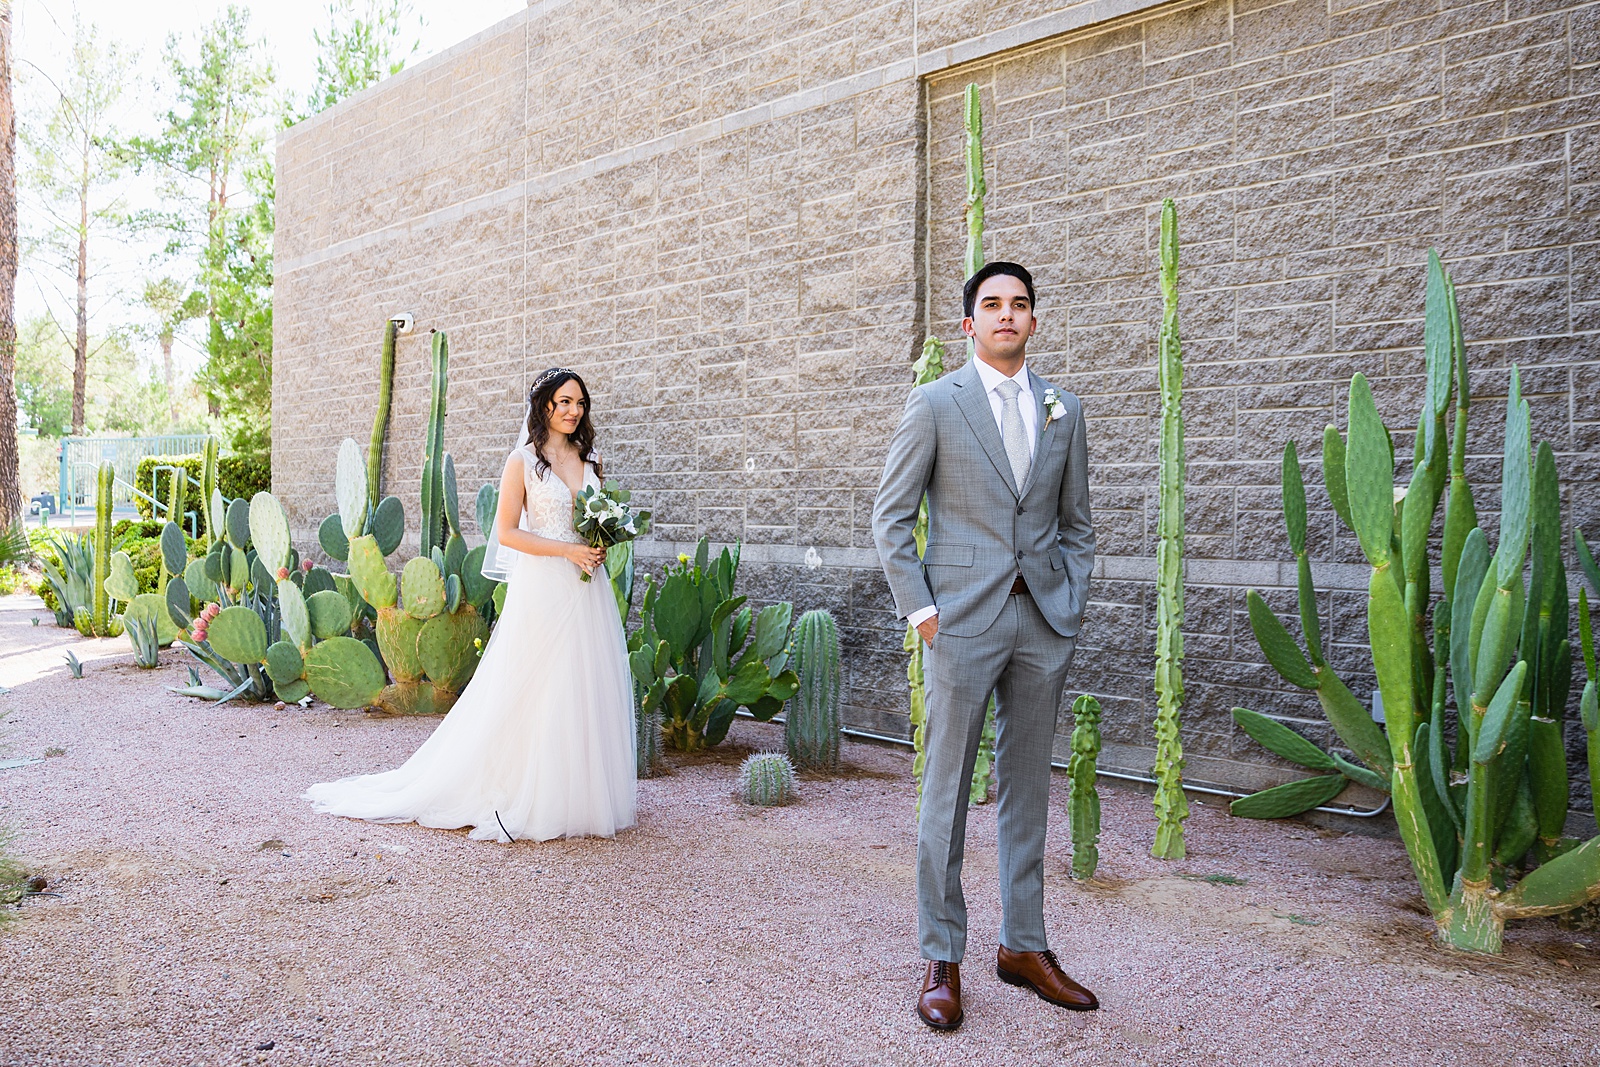 Bride and groom's first look at Hyatt Regency Scottsdale Resort & Spa At Gainey Ranch by Phoenix wedding photographer PMA Photography.